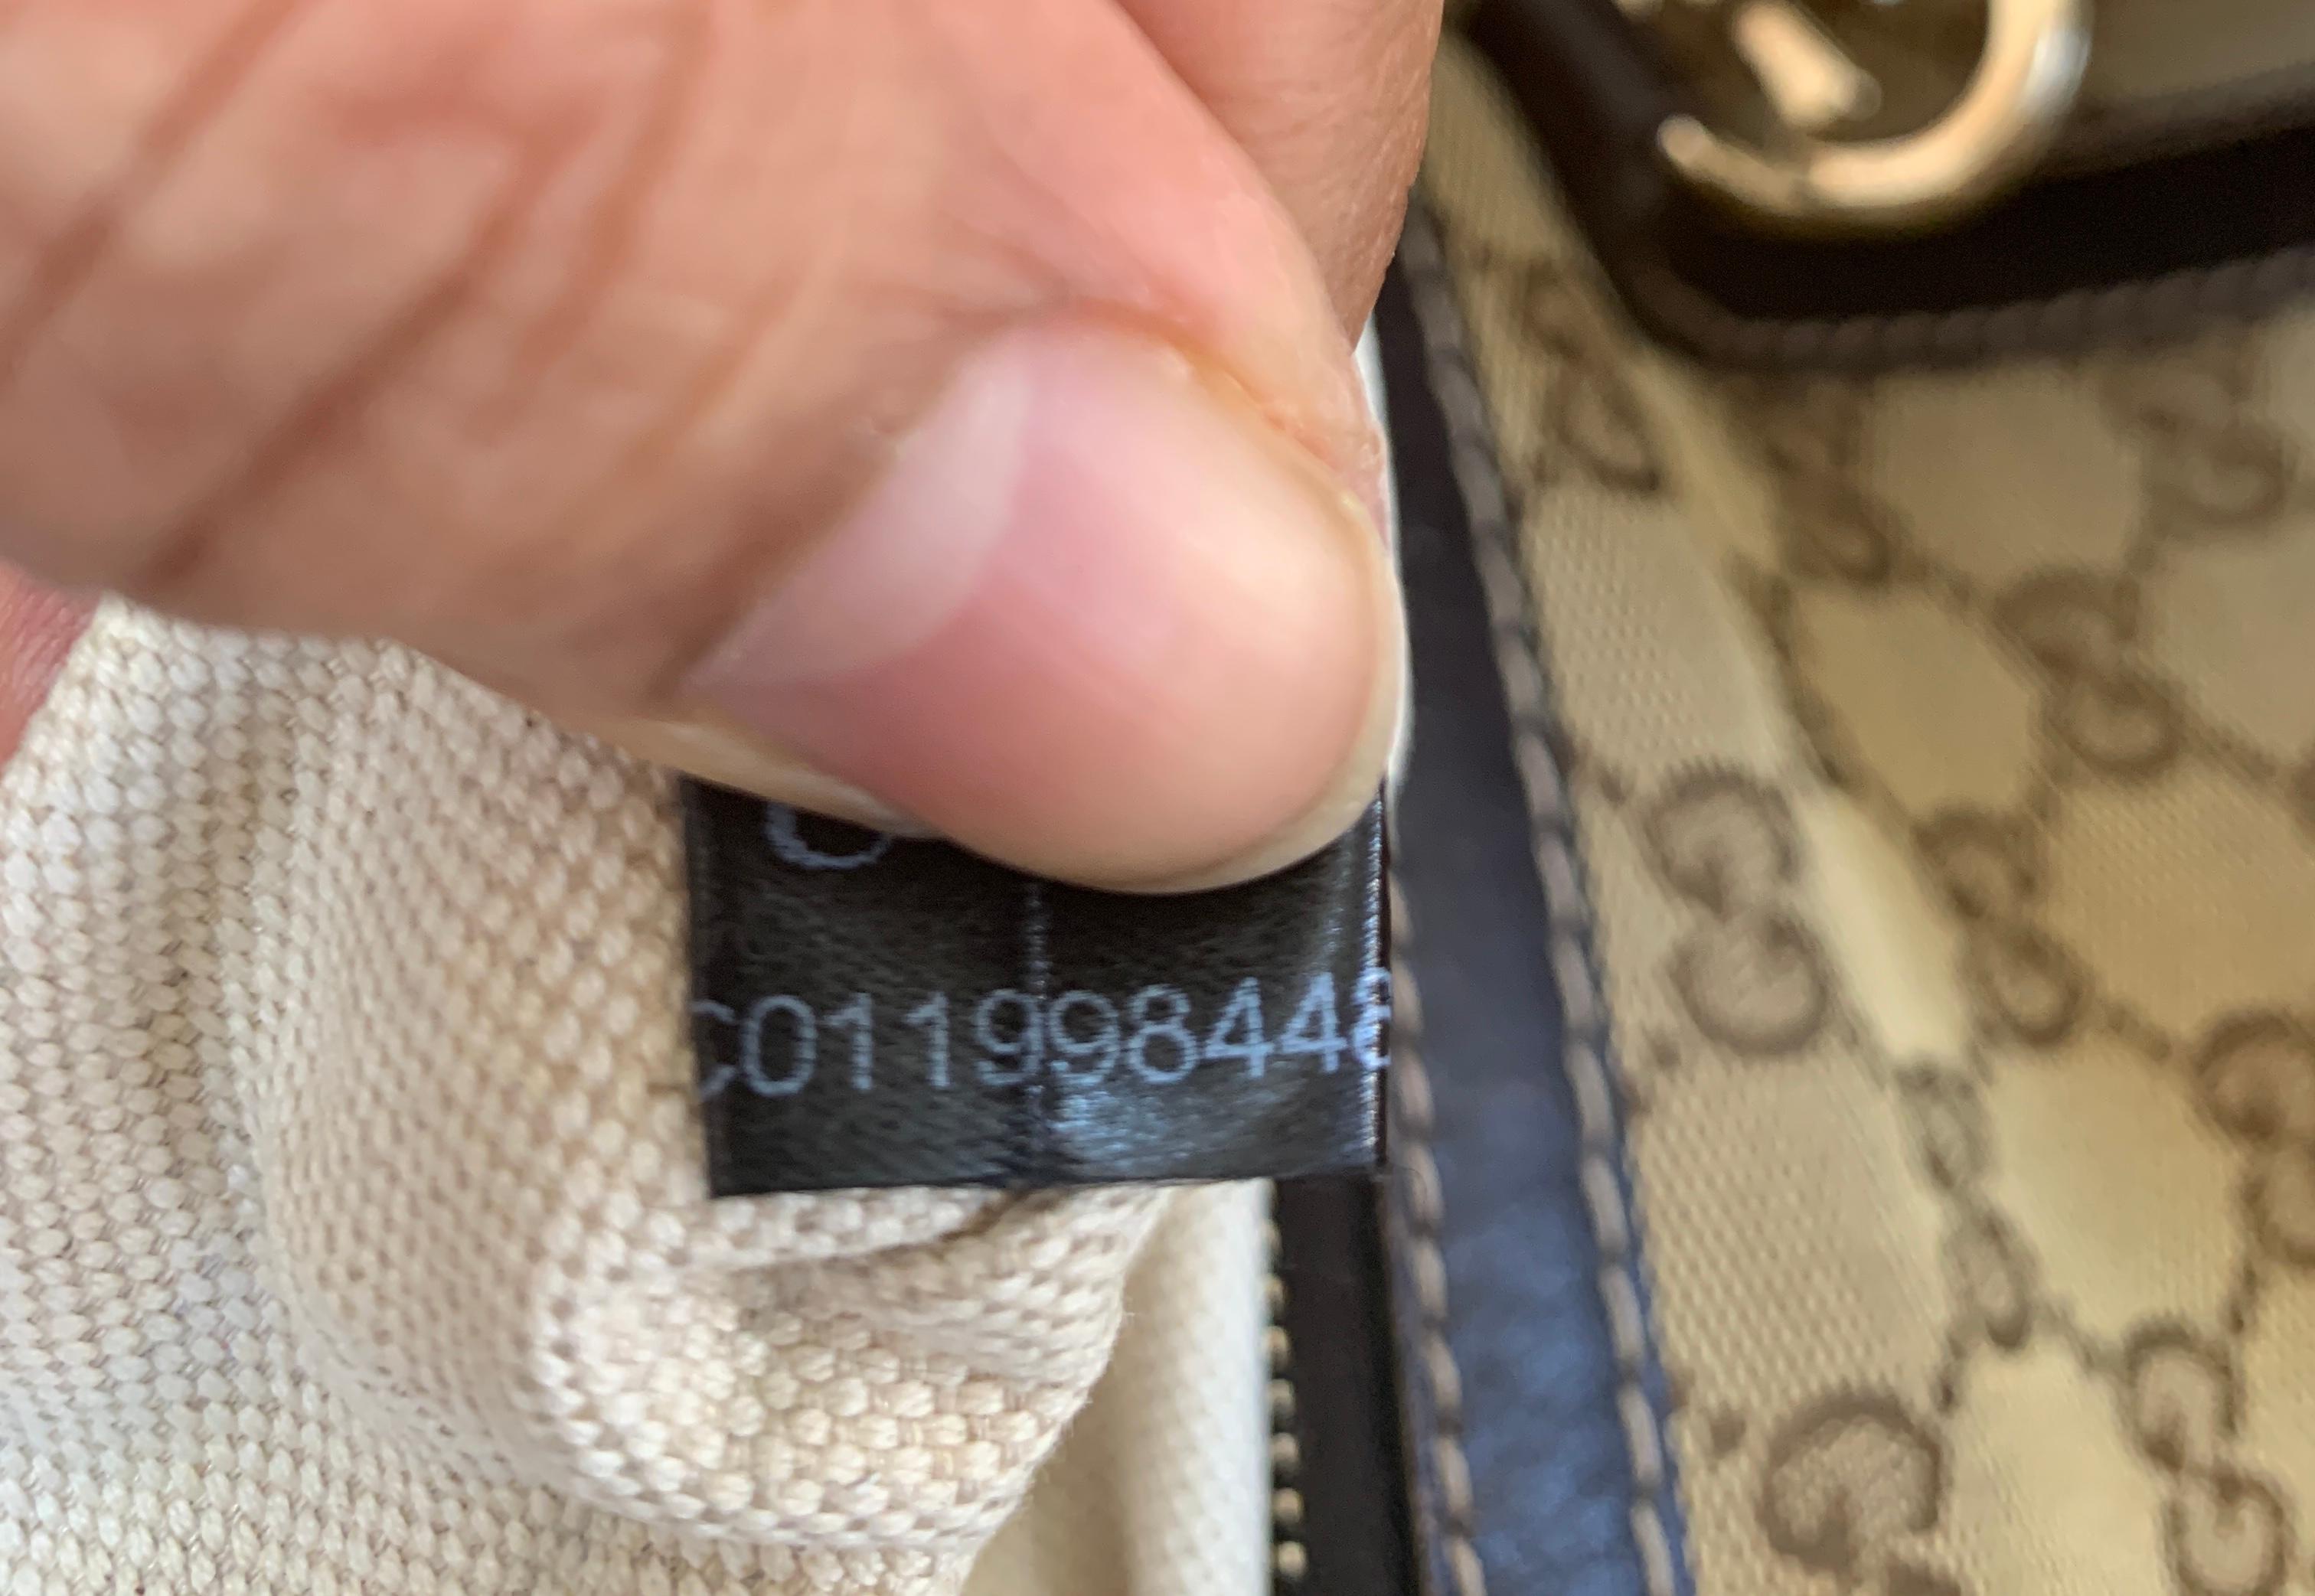 New Gucci Beige Chocolate  Medium  Bree Gg Guccissima Tote Bag 
Authenticity Guaranteed 
Details
Brand: Gucci
Condition: Good
Color Beige And Brown
material: Canvas And Leather
Gucci GG  Guccissima
 Pattern Double Handles 
Four Gold Hardware  two GG